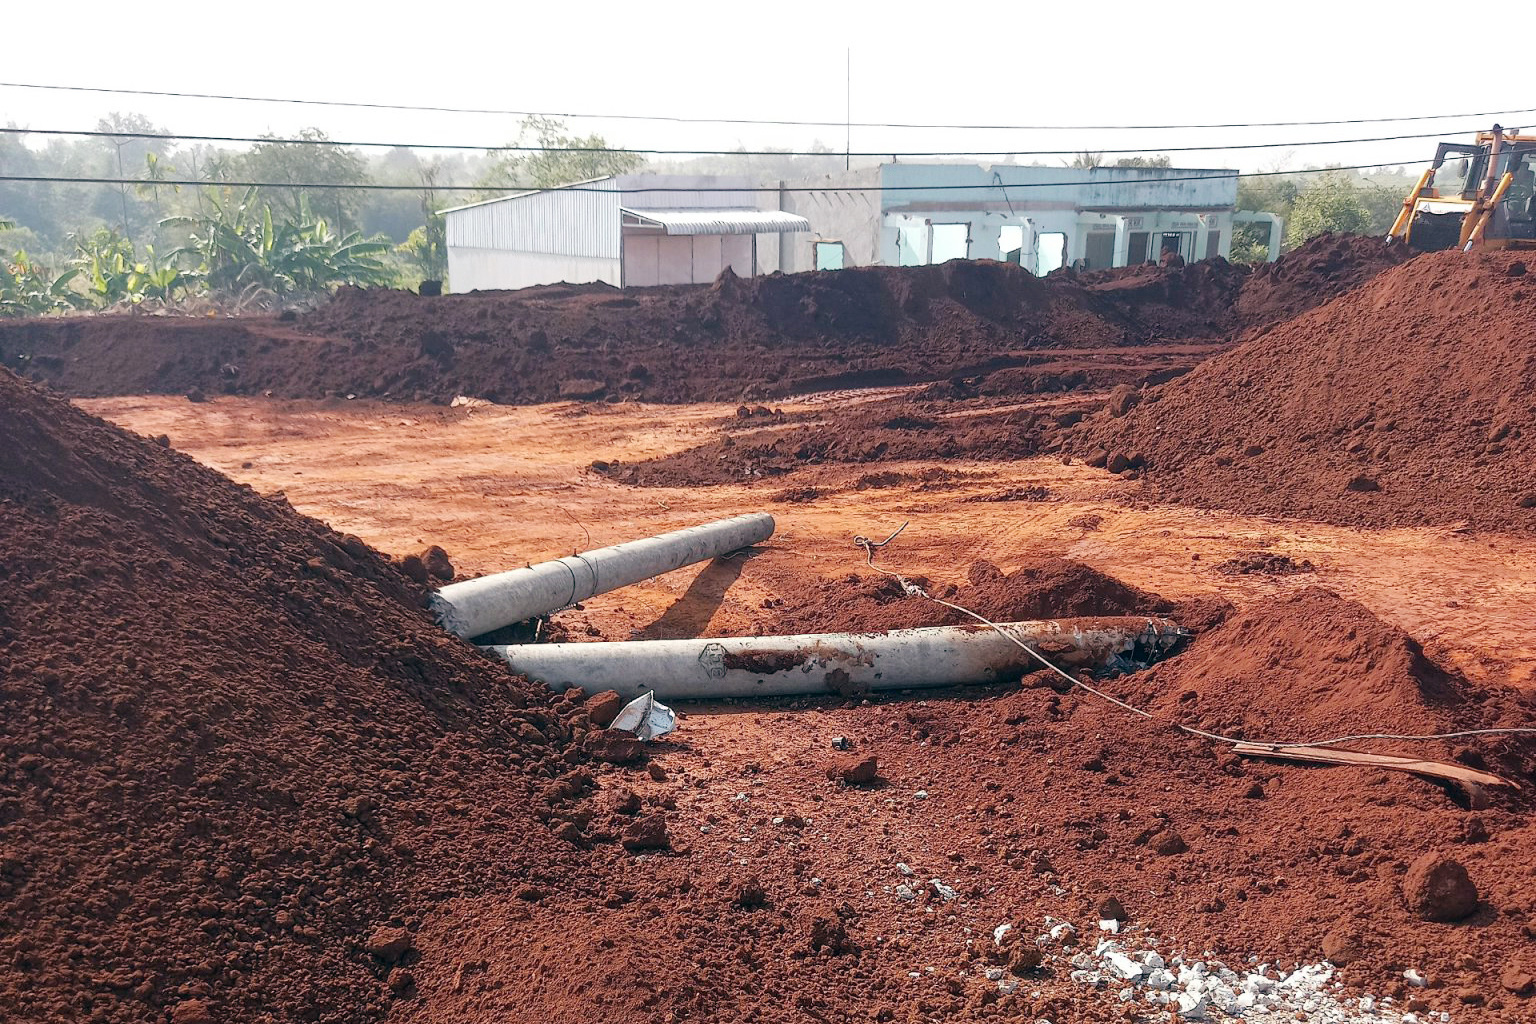 Ground-leveling work for airport project buries power posts, causes outage in southern Vietnam